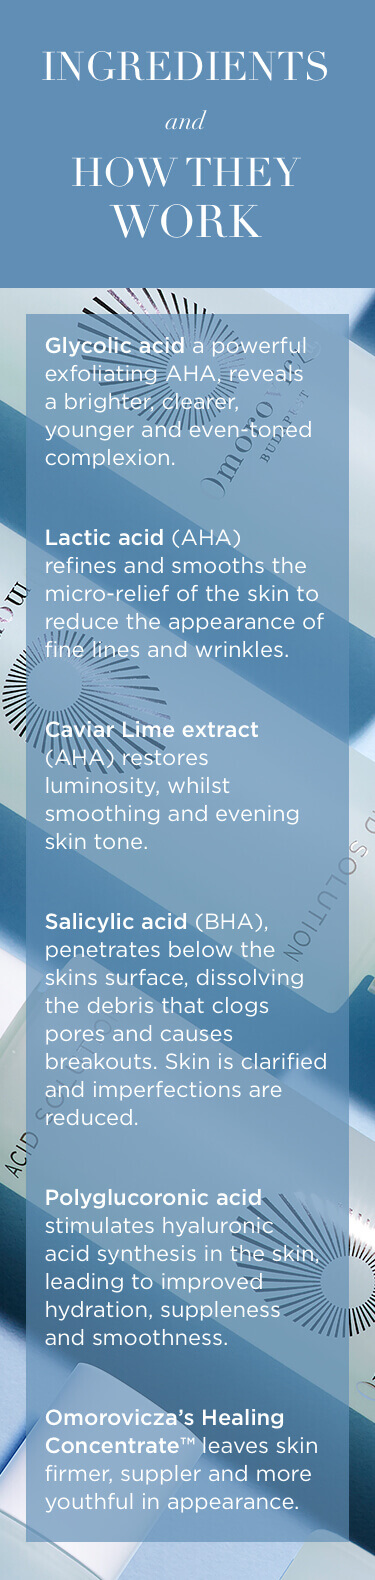 Ingredients and how they work. Glycolic acid a powerful exfoliating AHA, reveals, a brighter, clearer, younger and even-toned complexion.